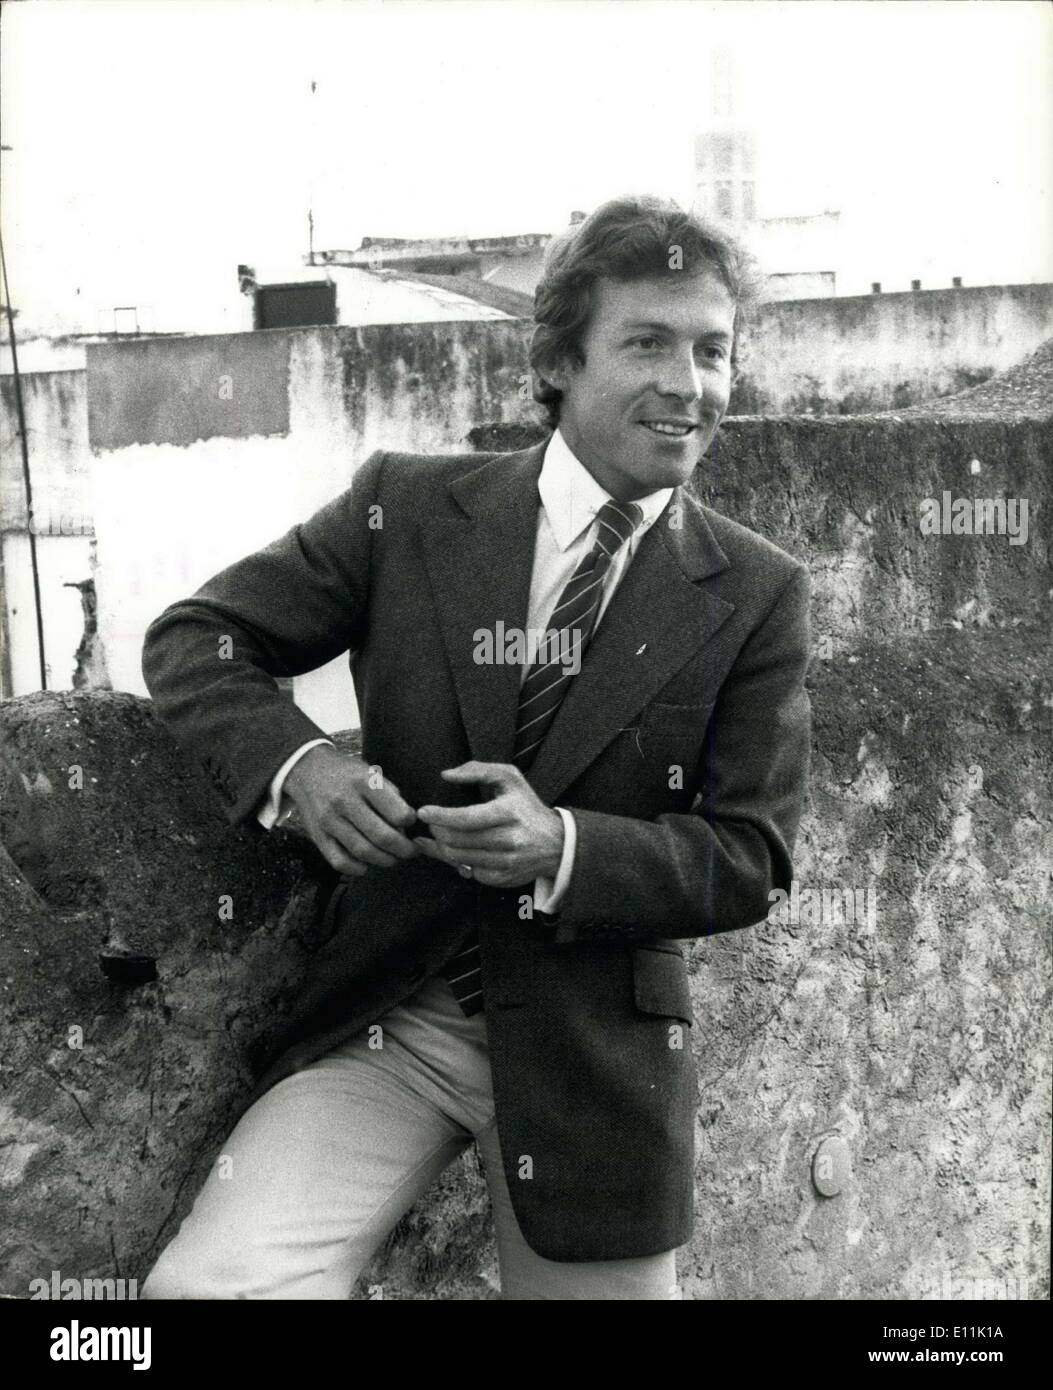 May 15, 1978 - I will never marry Princess Margaret says Roddy Llewellyn: Roddy Llewellyn the boyfriend of Princess Margaret said yesterday, in the heart of the Casbah in the ancient port of Tangier: There is no chance of my marrying Princess Margaret. In hi first interview since last week's announcement that Princess Margaret and Lord Snowdon are to be divorced, Roddy said that he believed his friendship with the Princess had been Grossly Exaggerated, when asked why, he replied 'I don't want to talk about it anymore, and then said categorically that eh would never marry the Princess but Stock Photo